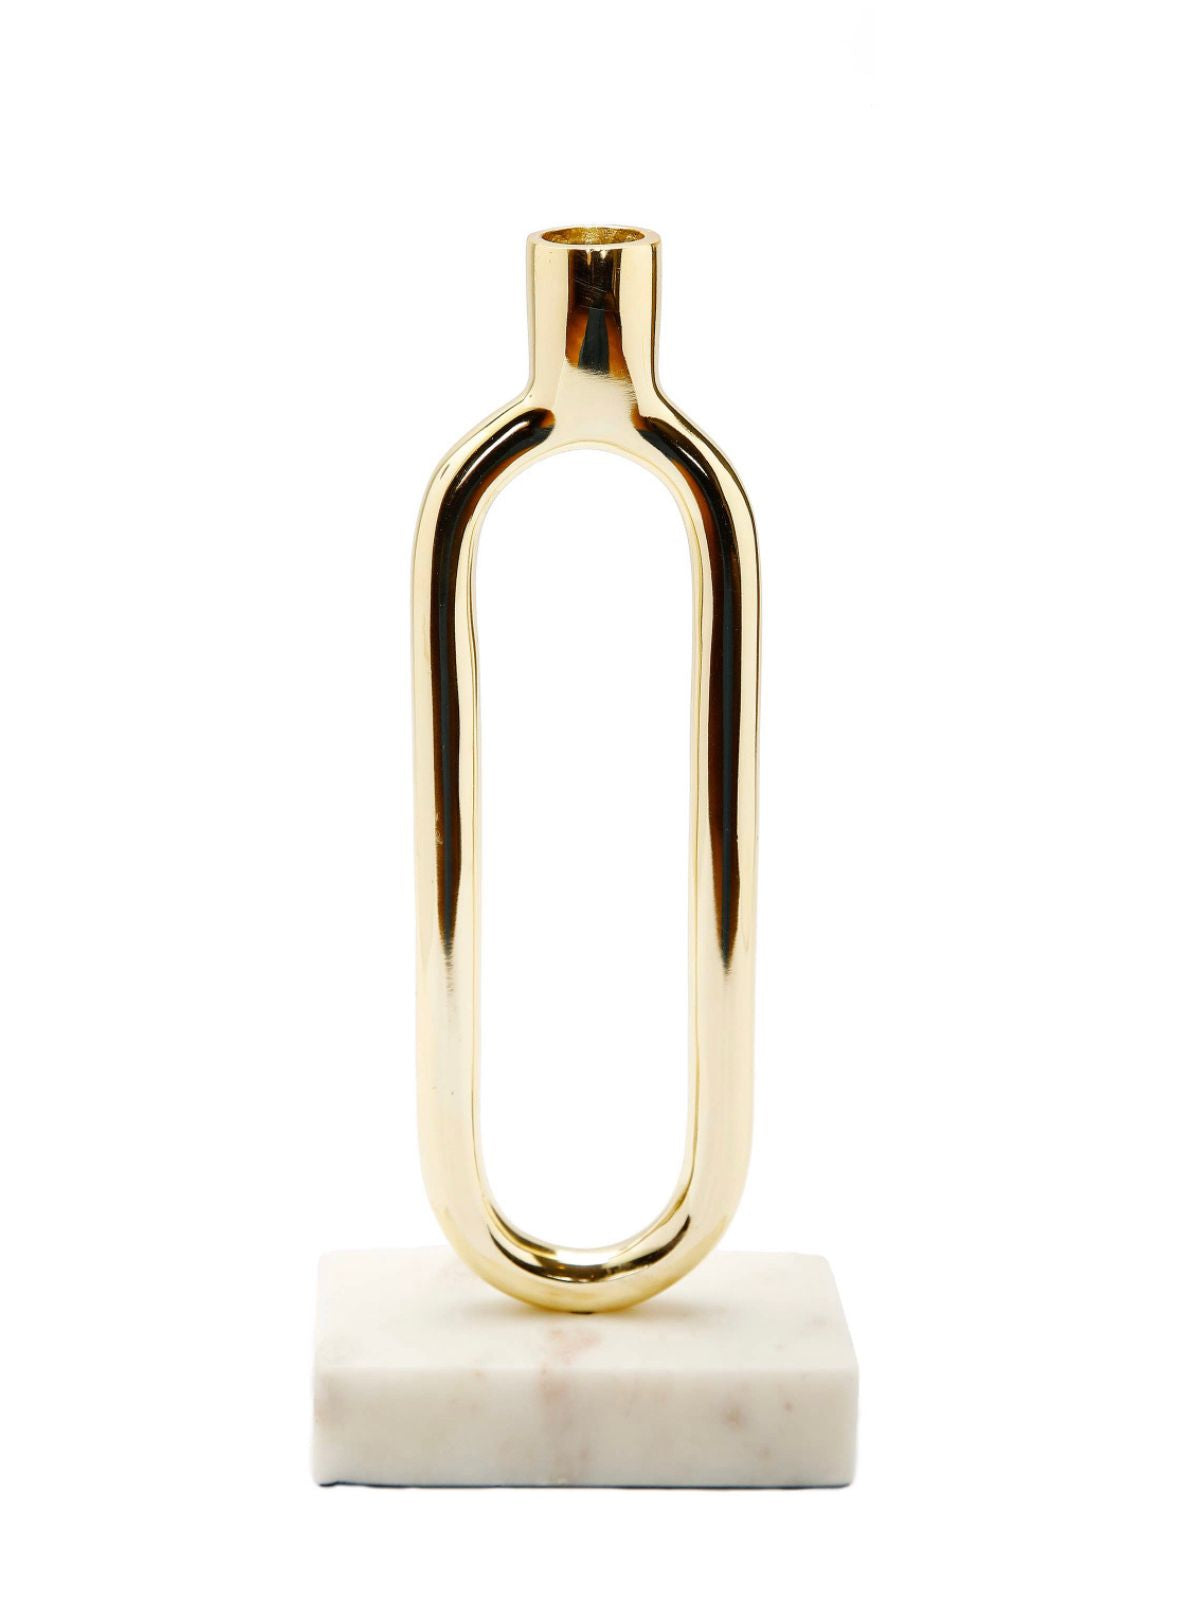 11.75H Gold Loop Taper Candle Holder on Marble Base. Sold By KYA Home Decor.